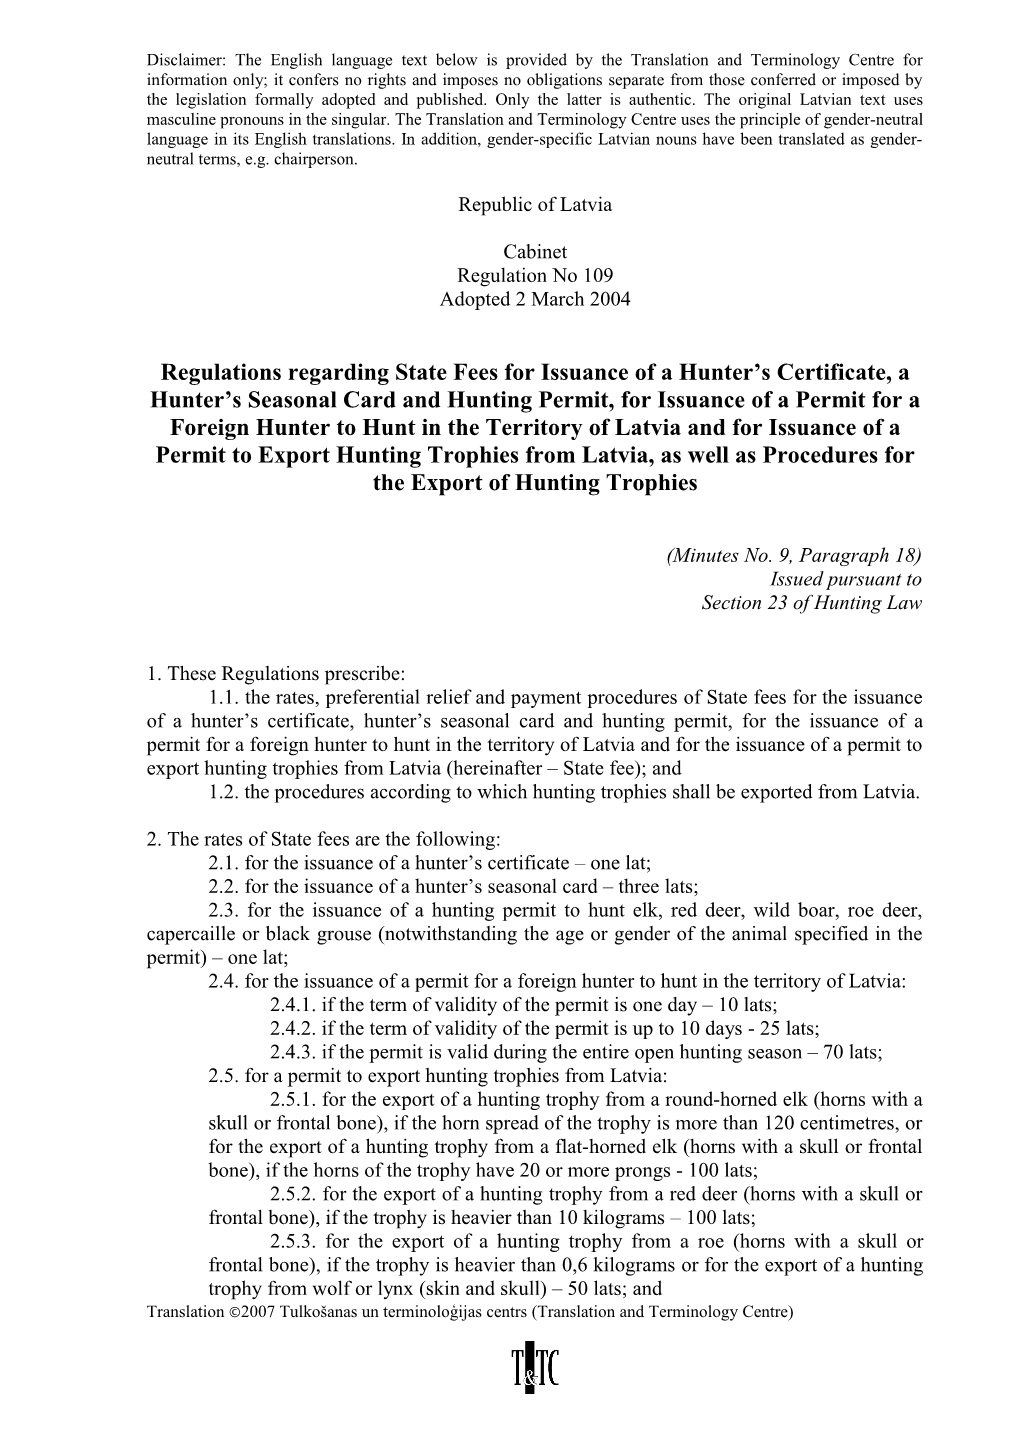 Regulations Regarding State Fees for Issuance of a Hunter S Certificate, a Hunter S Seasonal